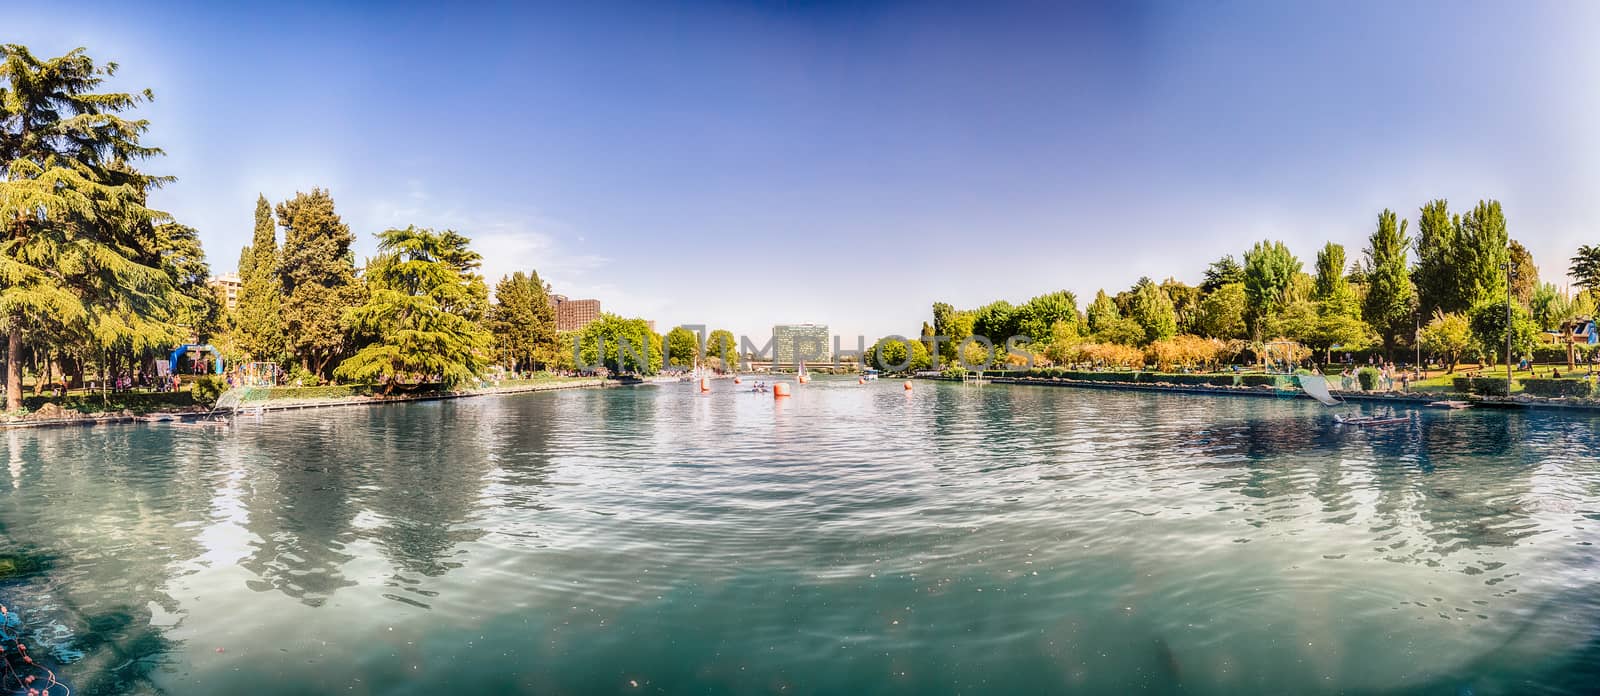 Panoramic view over the lake of EUR in Rome, Italy by marcorubino